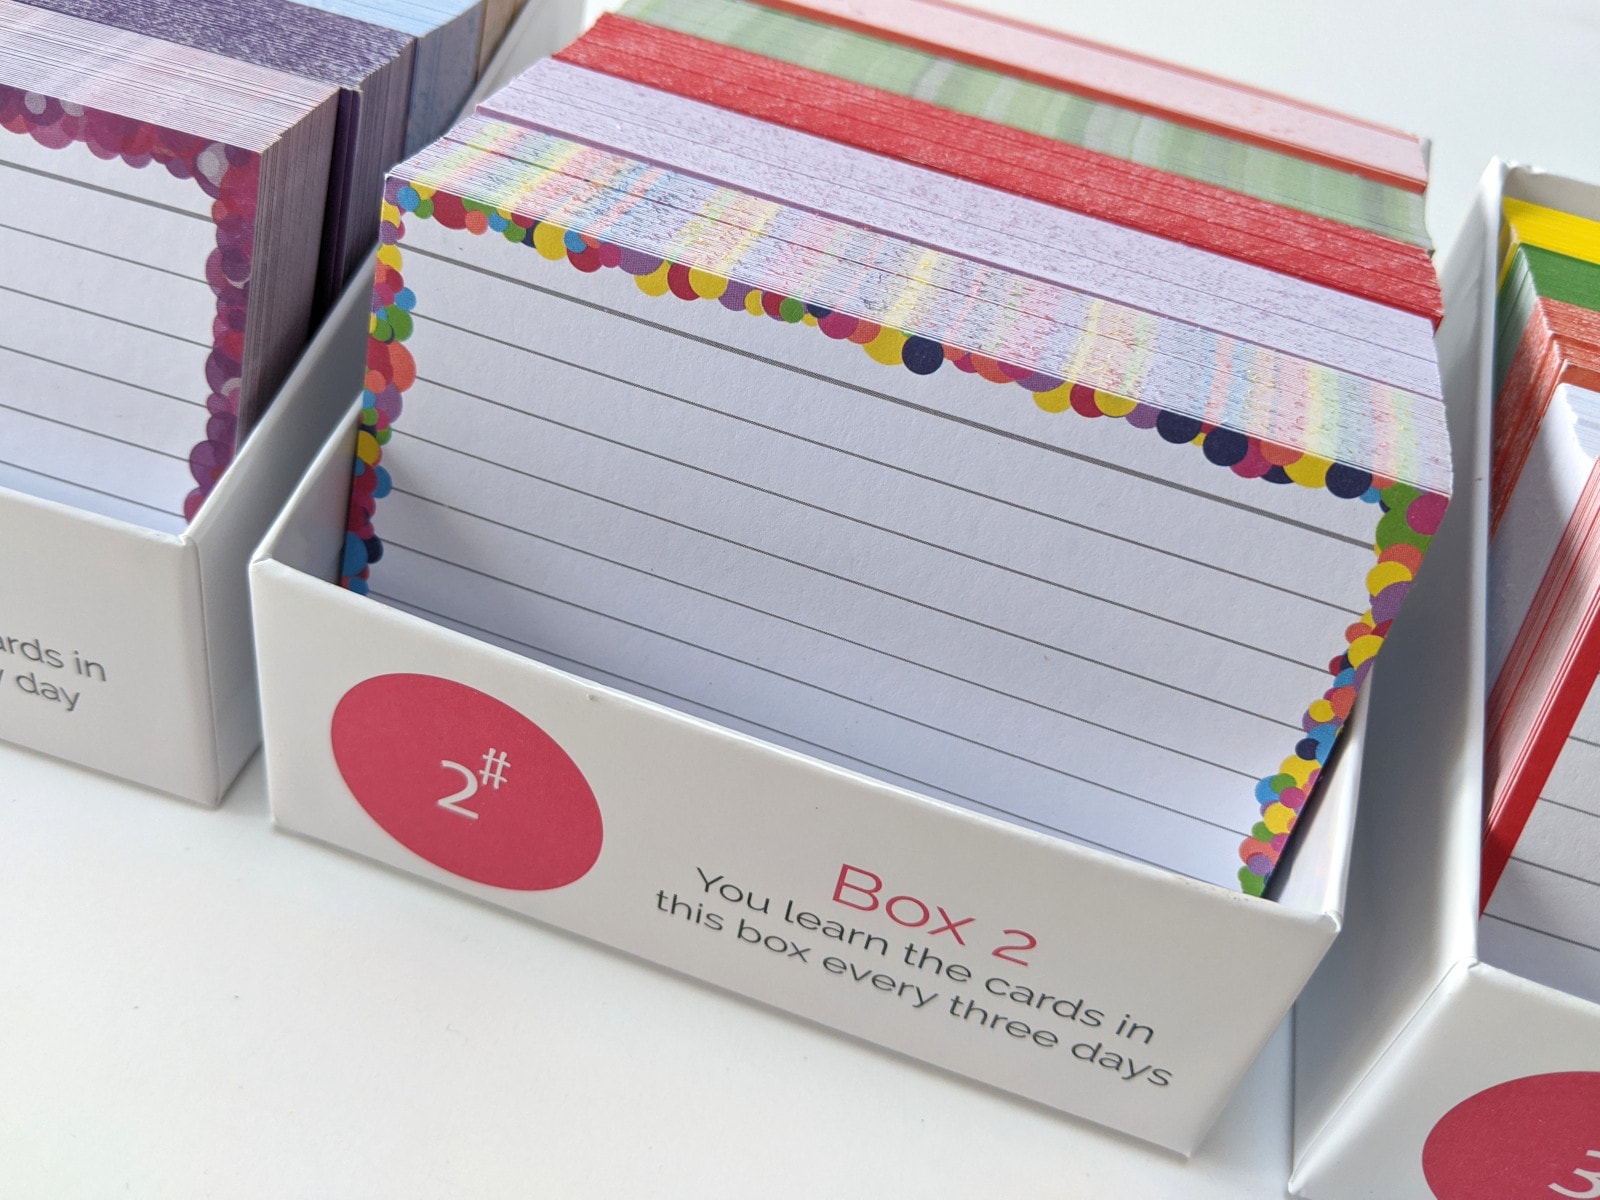 The Leitner Cards System - Flashcards and Stationery